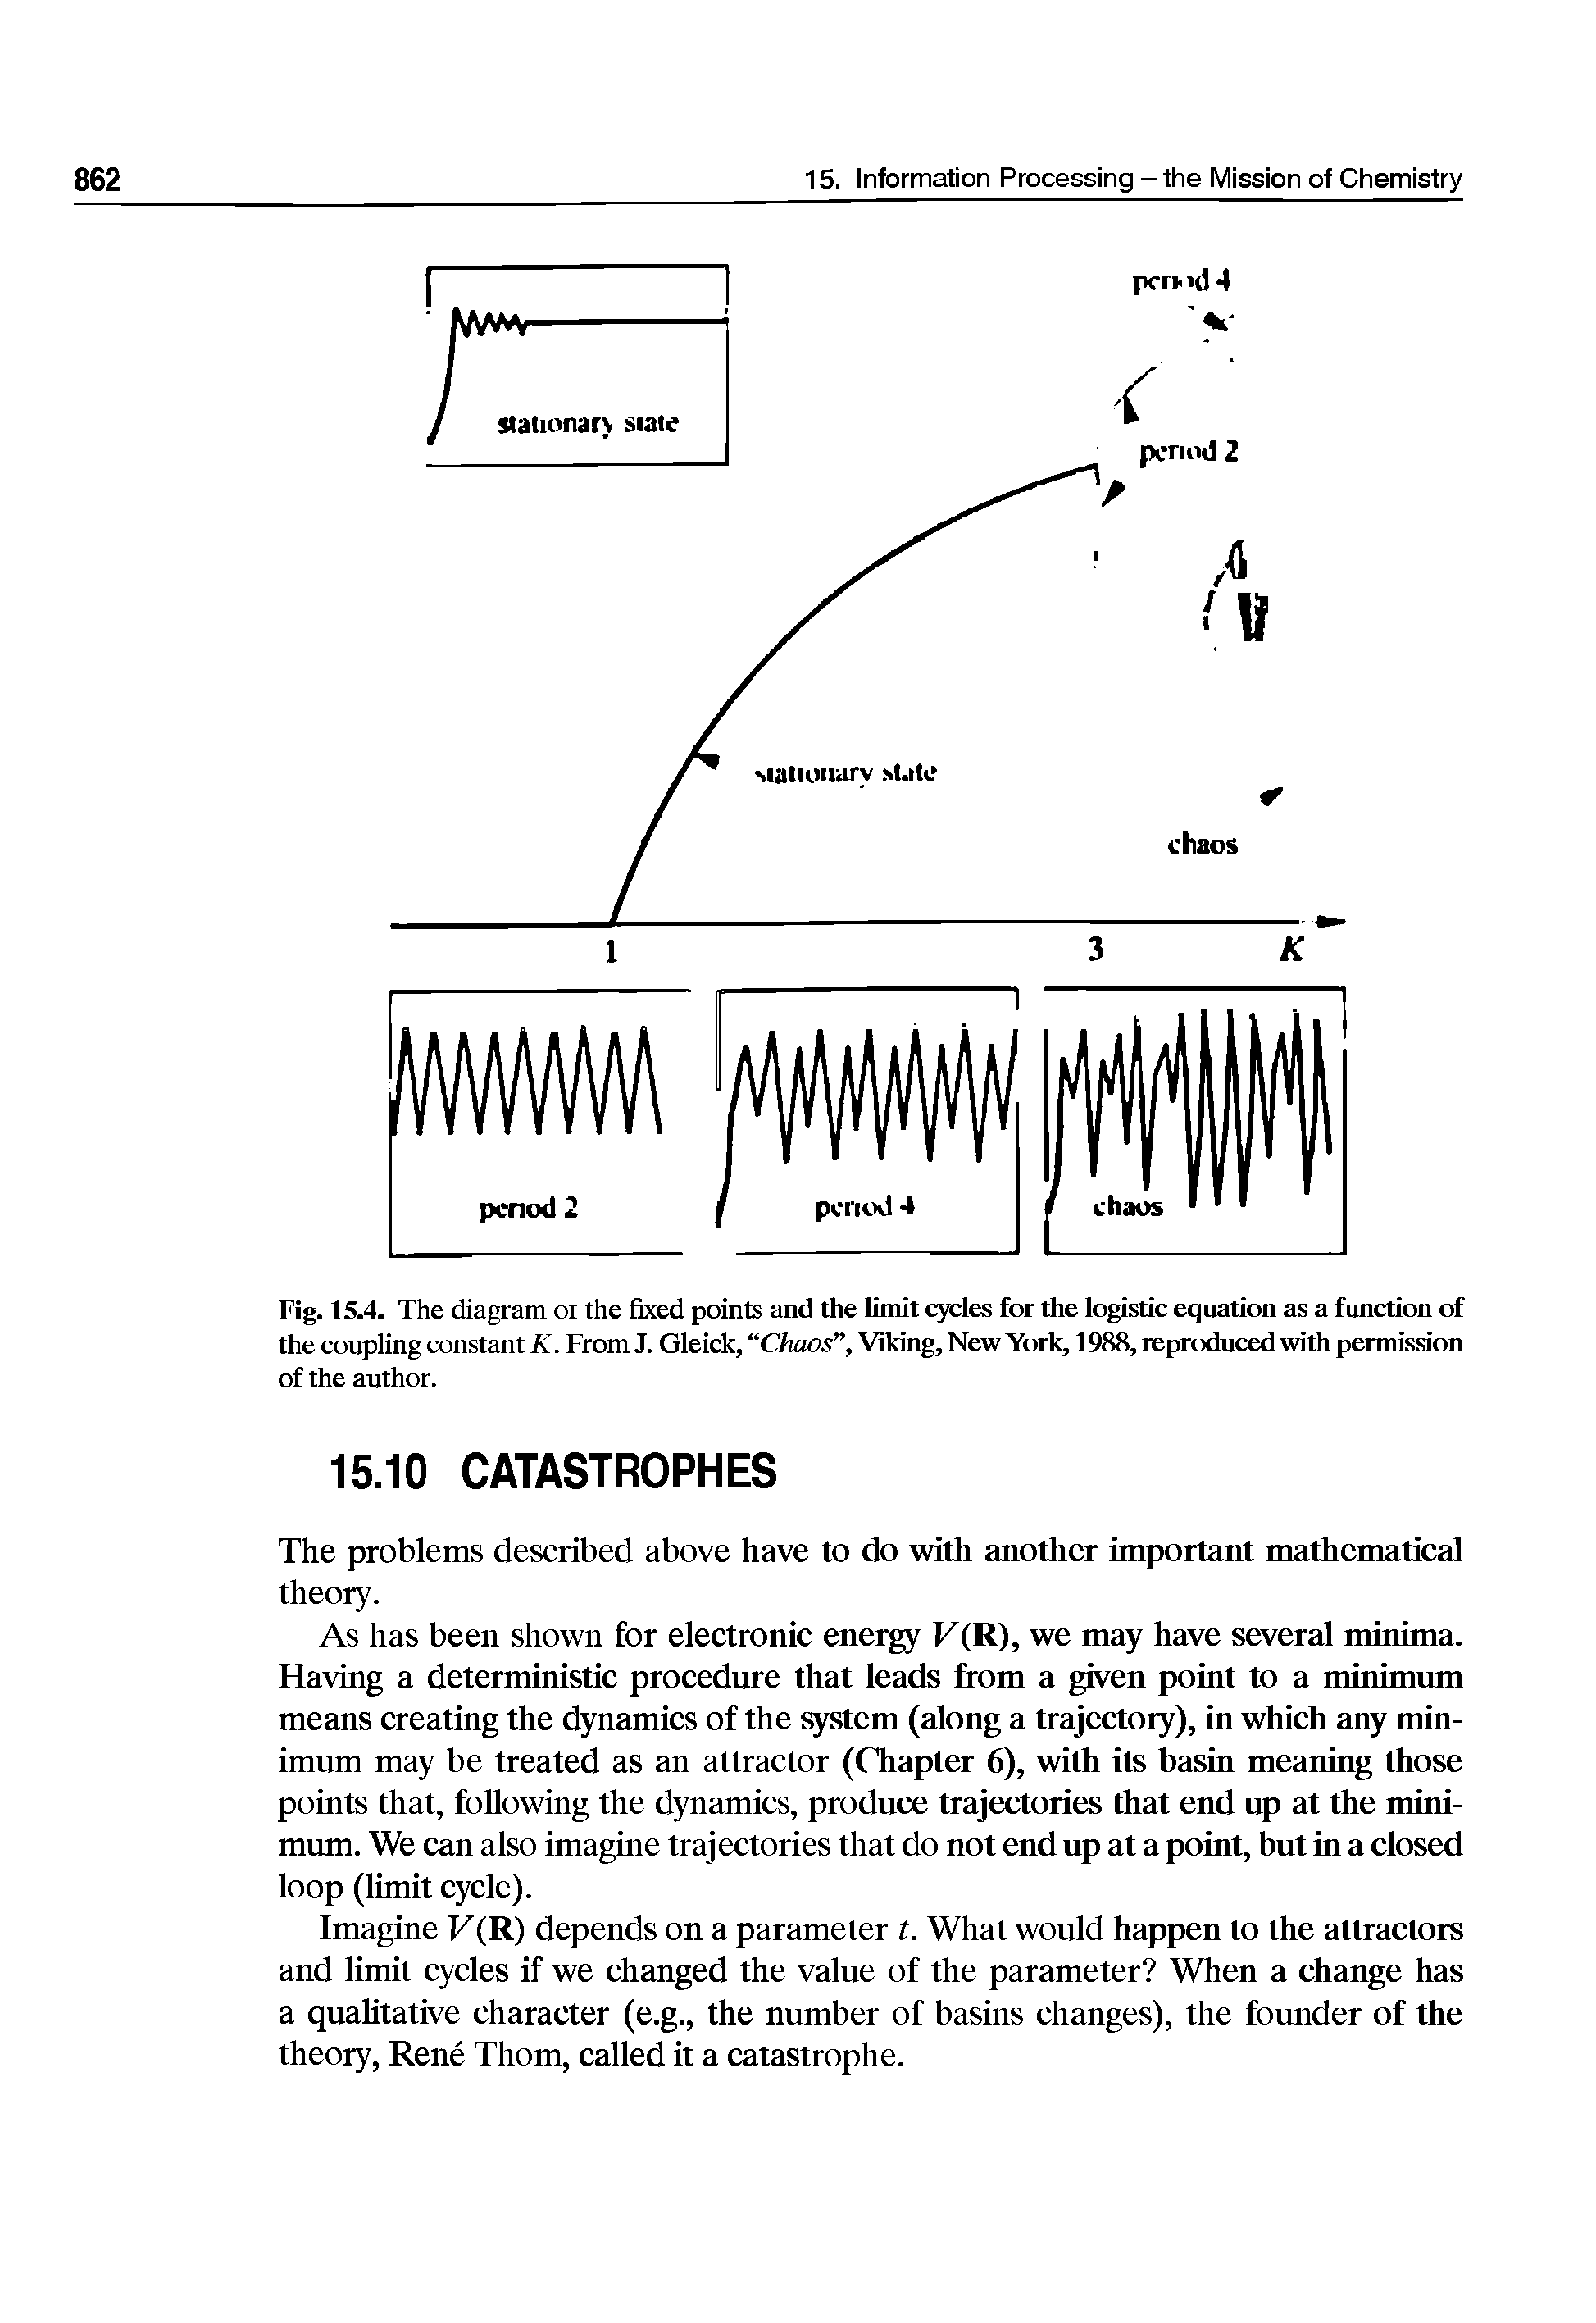 Fig. 15.4. The diagram or the fixed points and the limit cycles for the logistic equation as a function of the coupling constant K. From J. Gleick, Chaos , Viking, New York, 1988, reproduced with permission of the author.